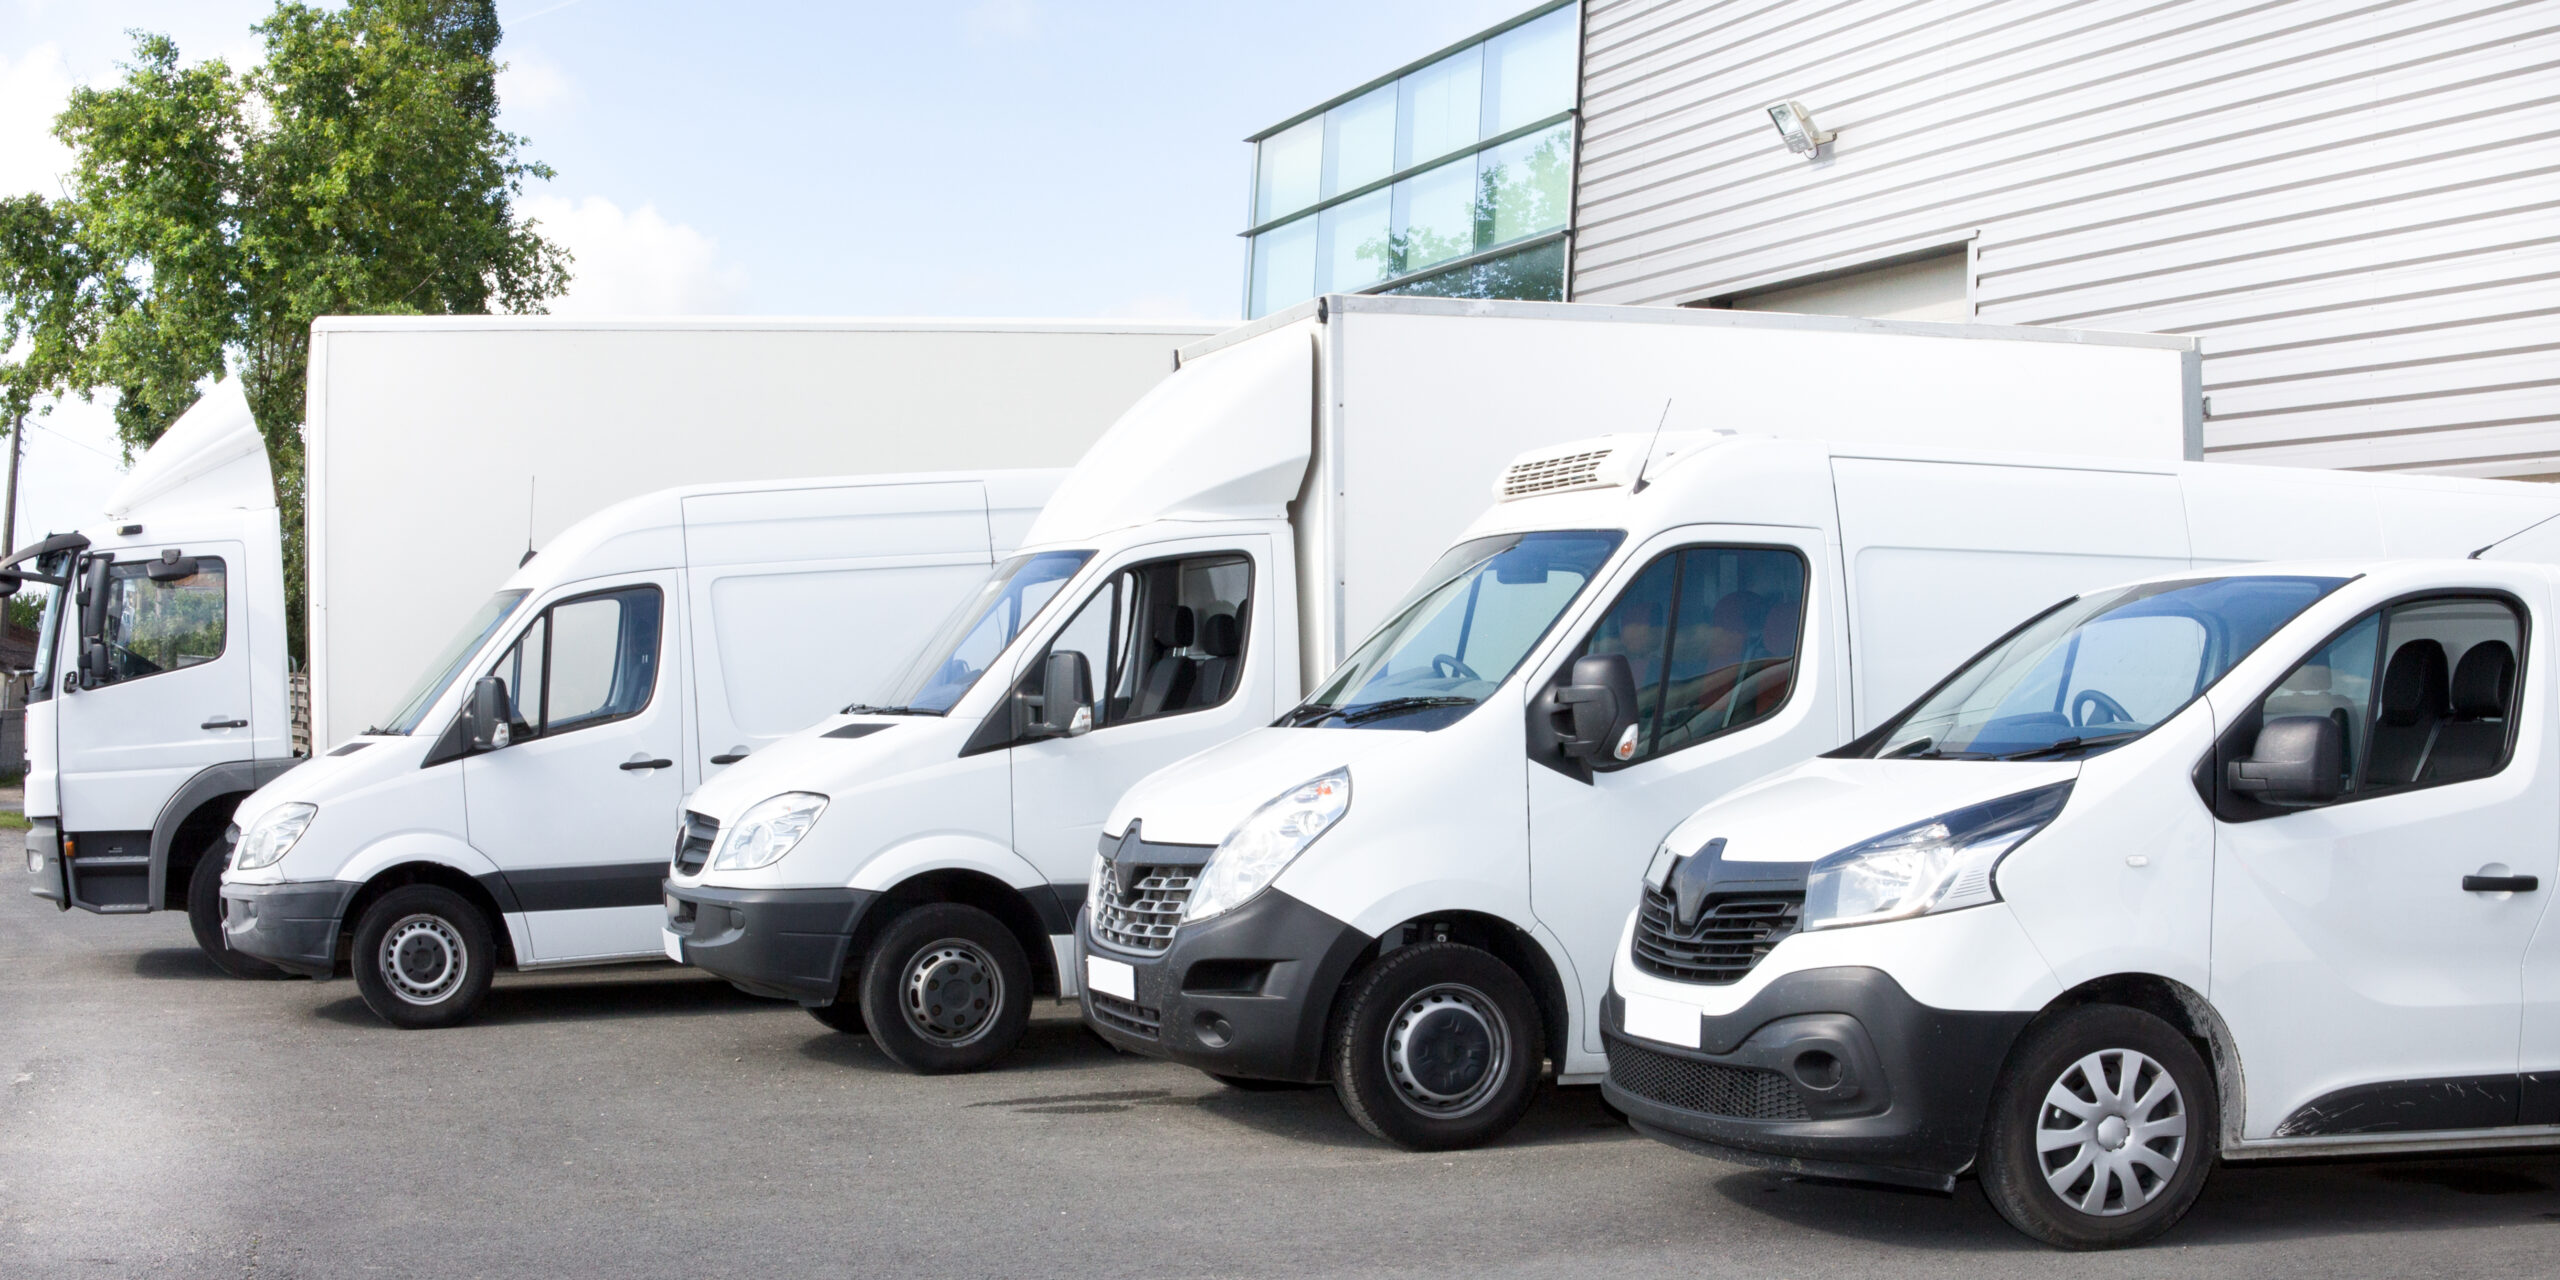 Image shows different delivery vehicles lined up outside a warehouse